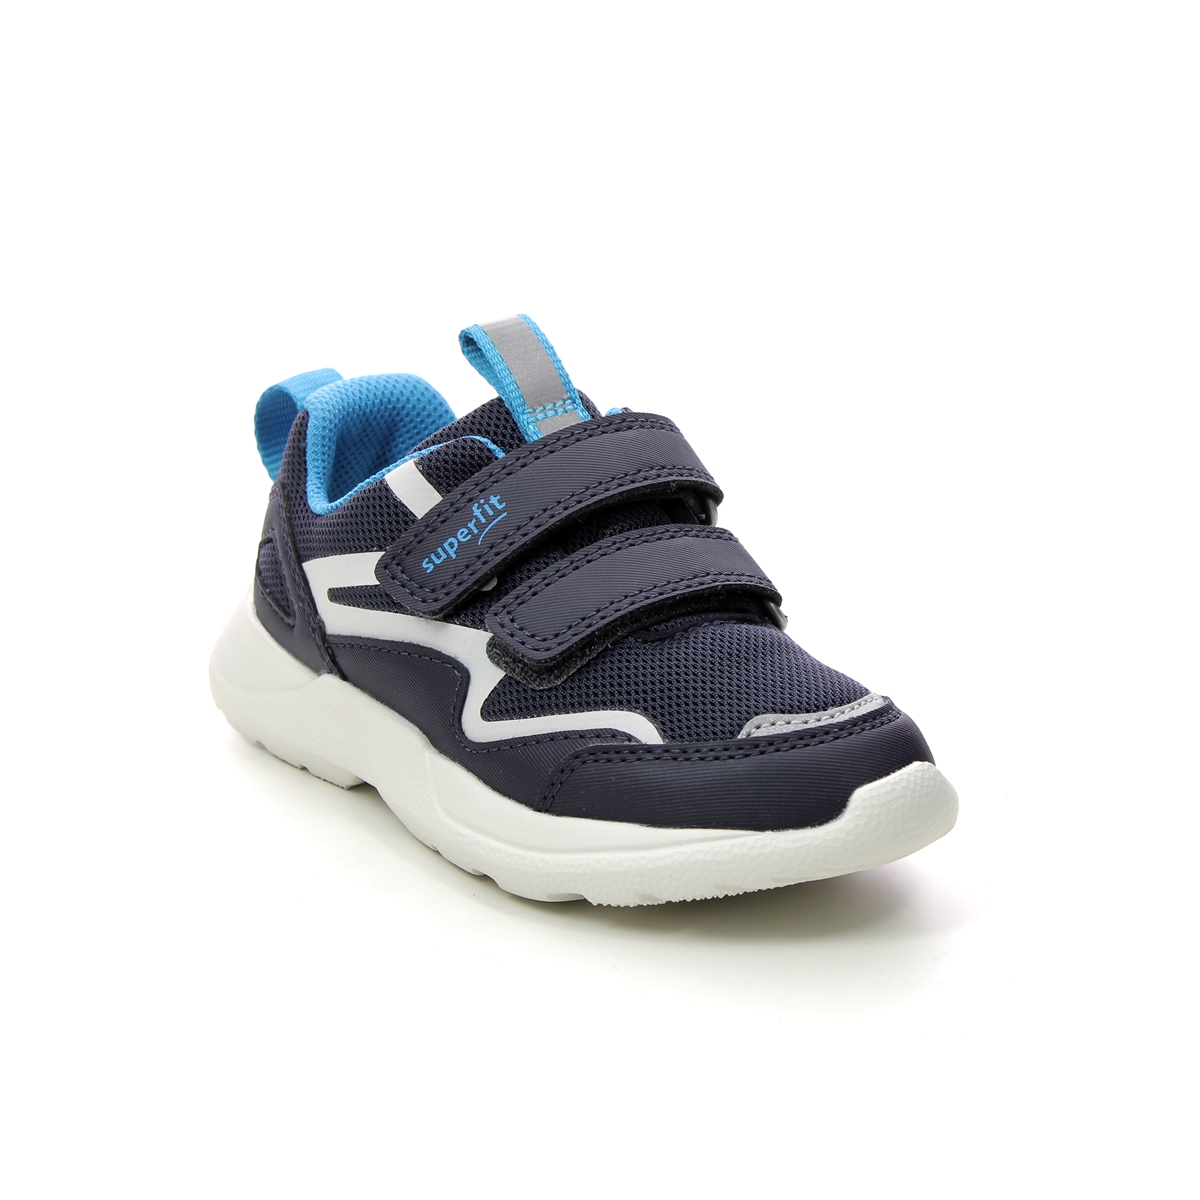 Superfit Rush Mini Navy Kids Trainers 1006206-8000 In Size 24 In Plain Navy For kids